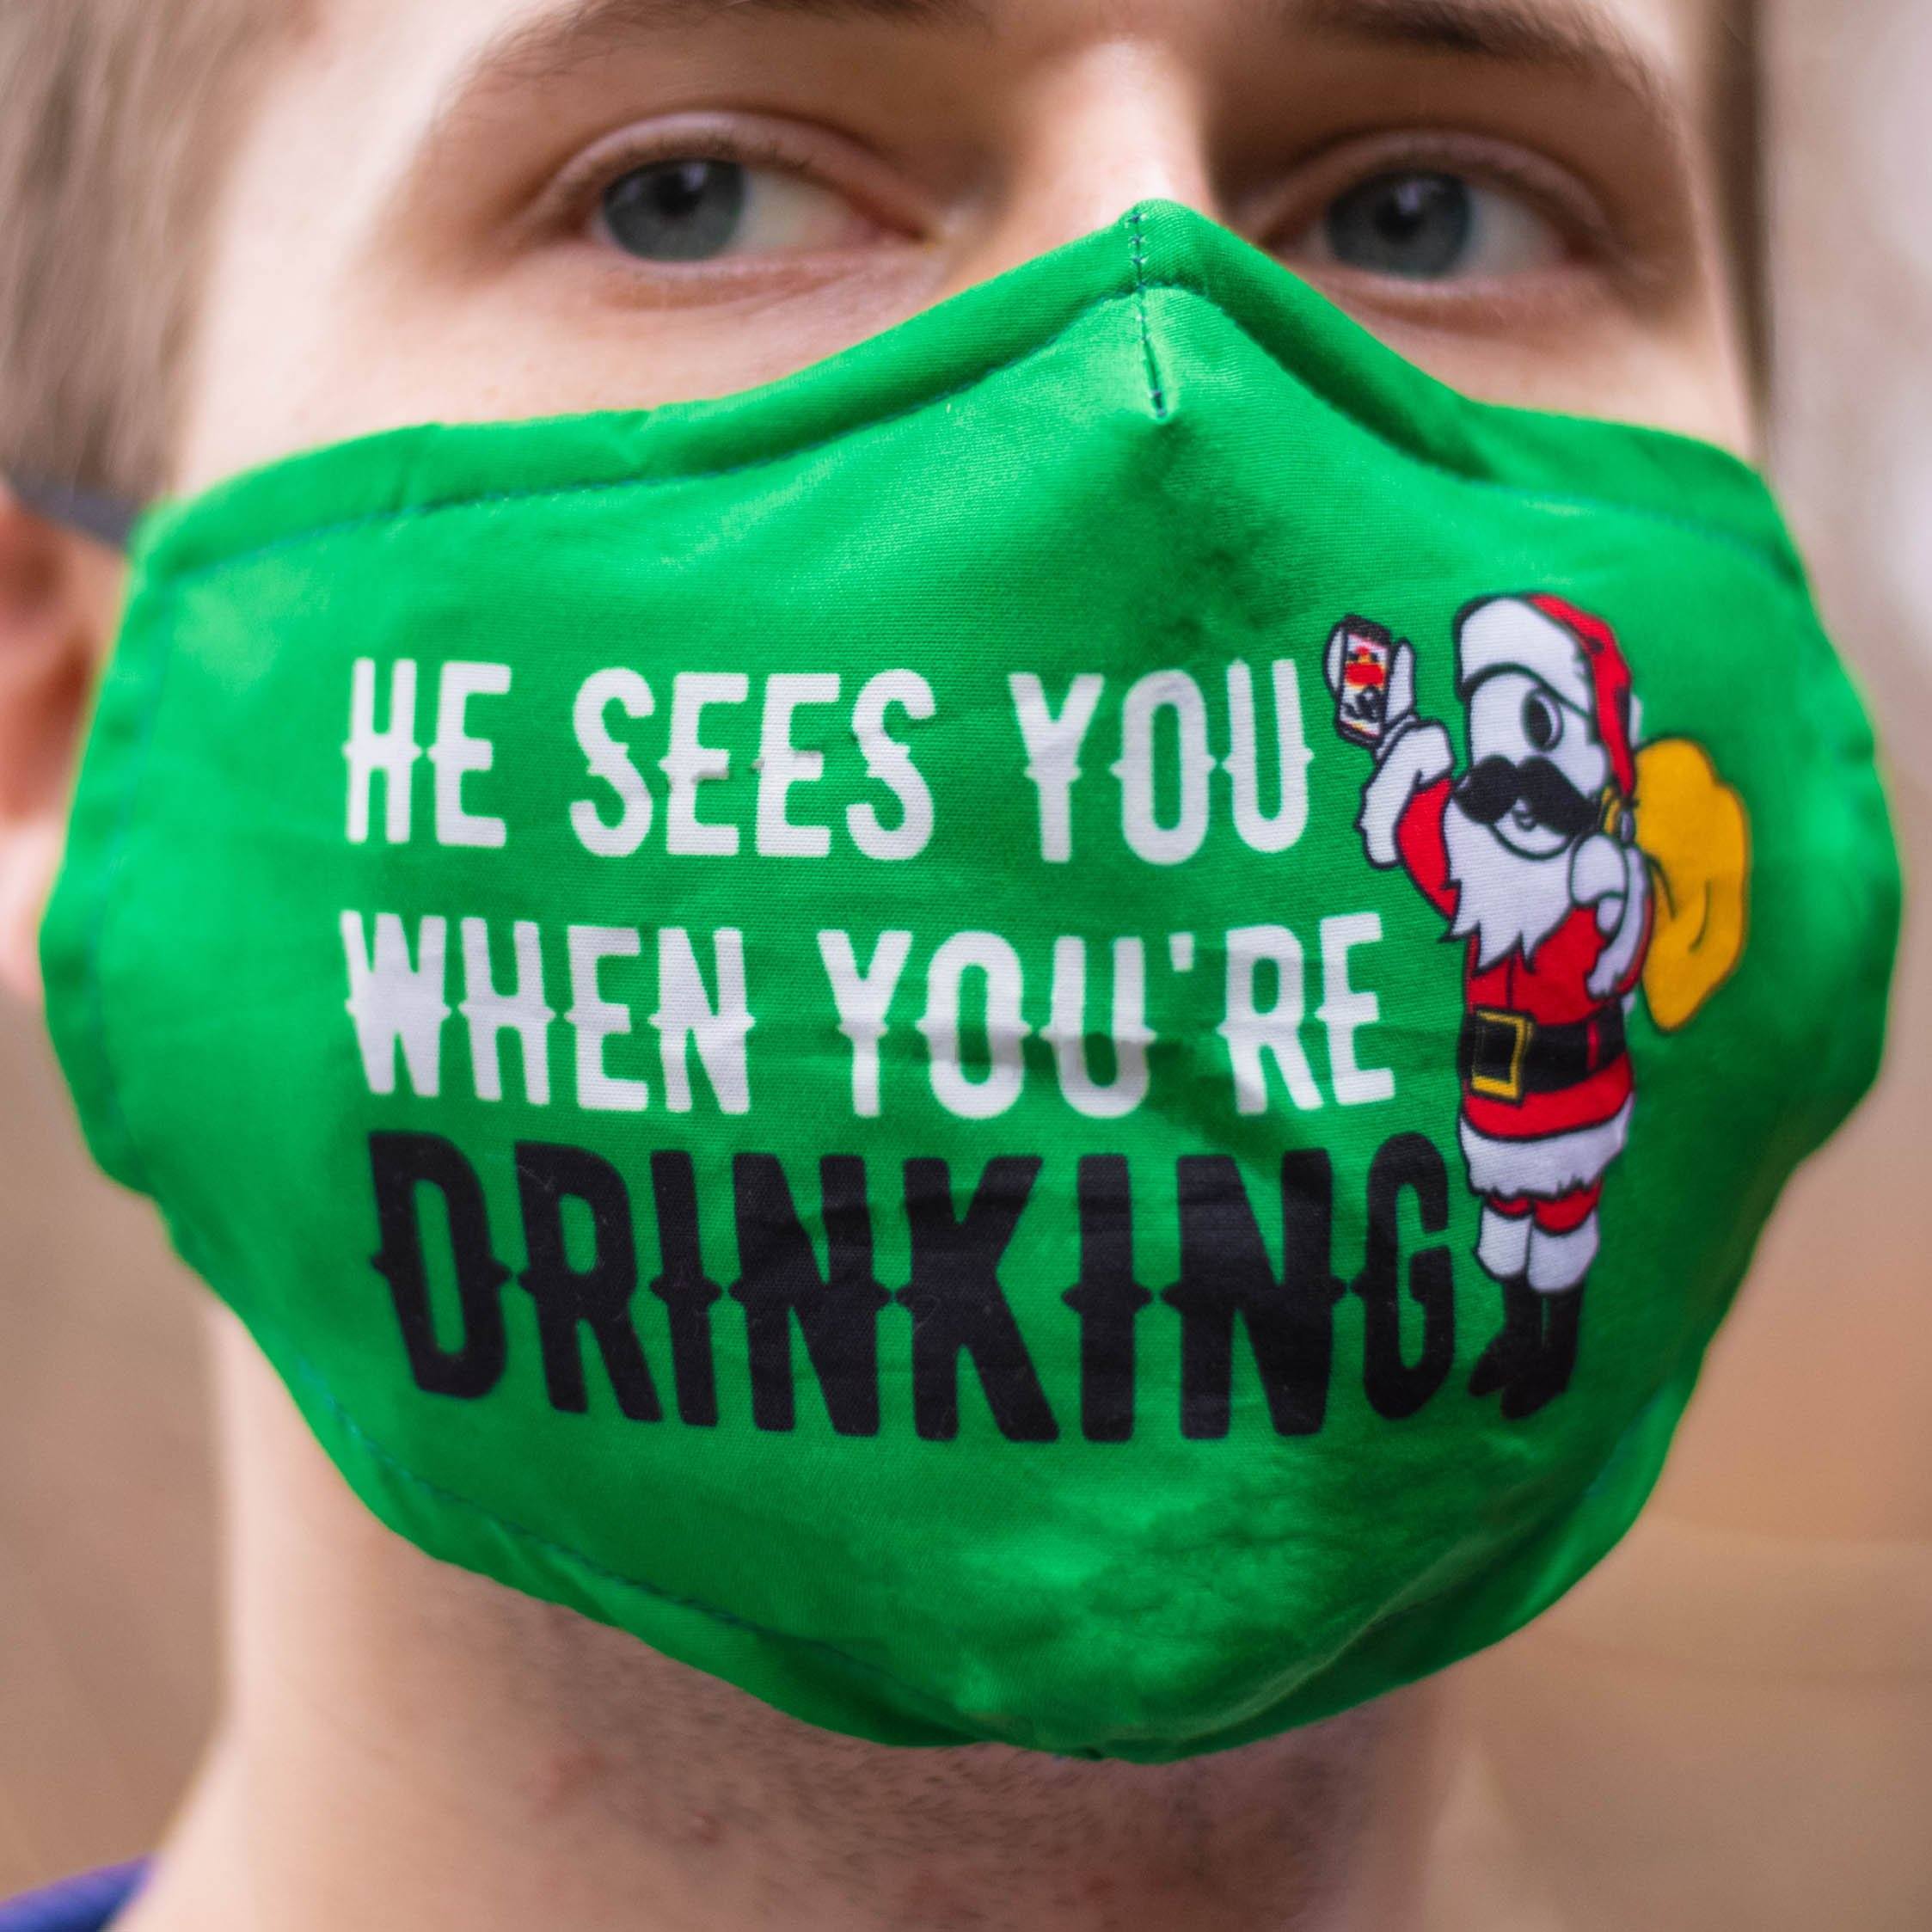 He Sees You When You're Drinking (Green) / Face Mask - Route One Apparel